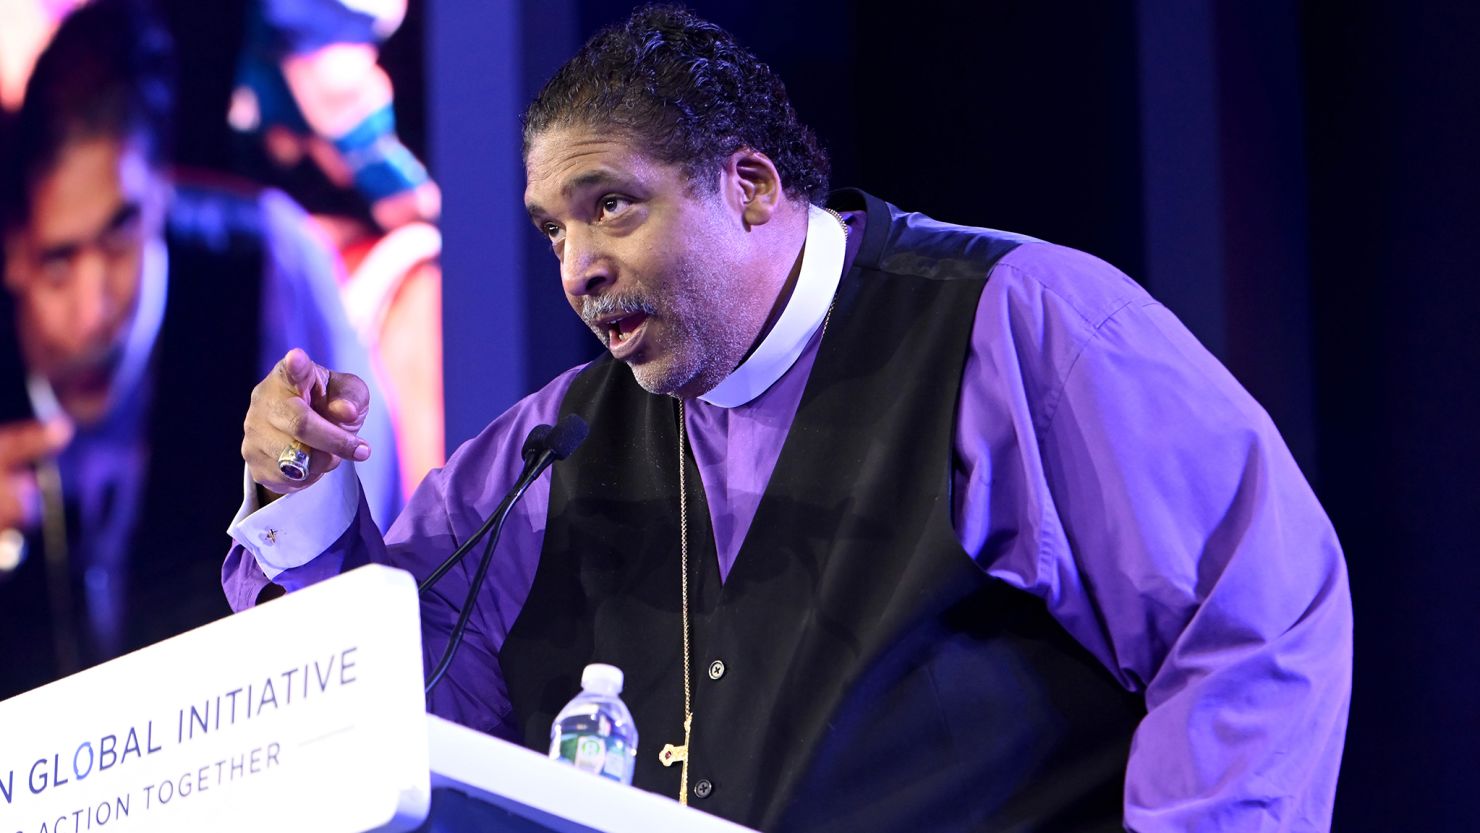 Bishop William J. Barber III speaks onstage during the Clinton Global Initiative September 2023 Meeting at New York Hilton Midtown on September 19, 2023 in New York City.